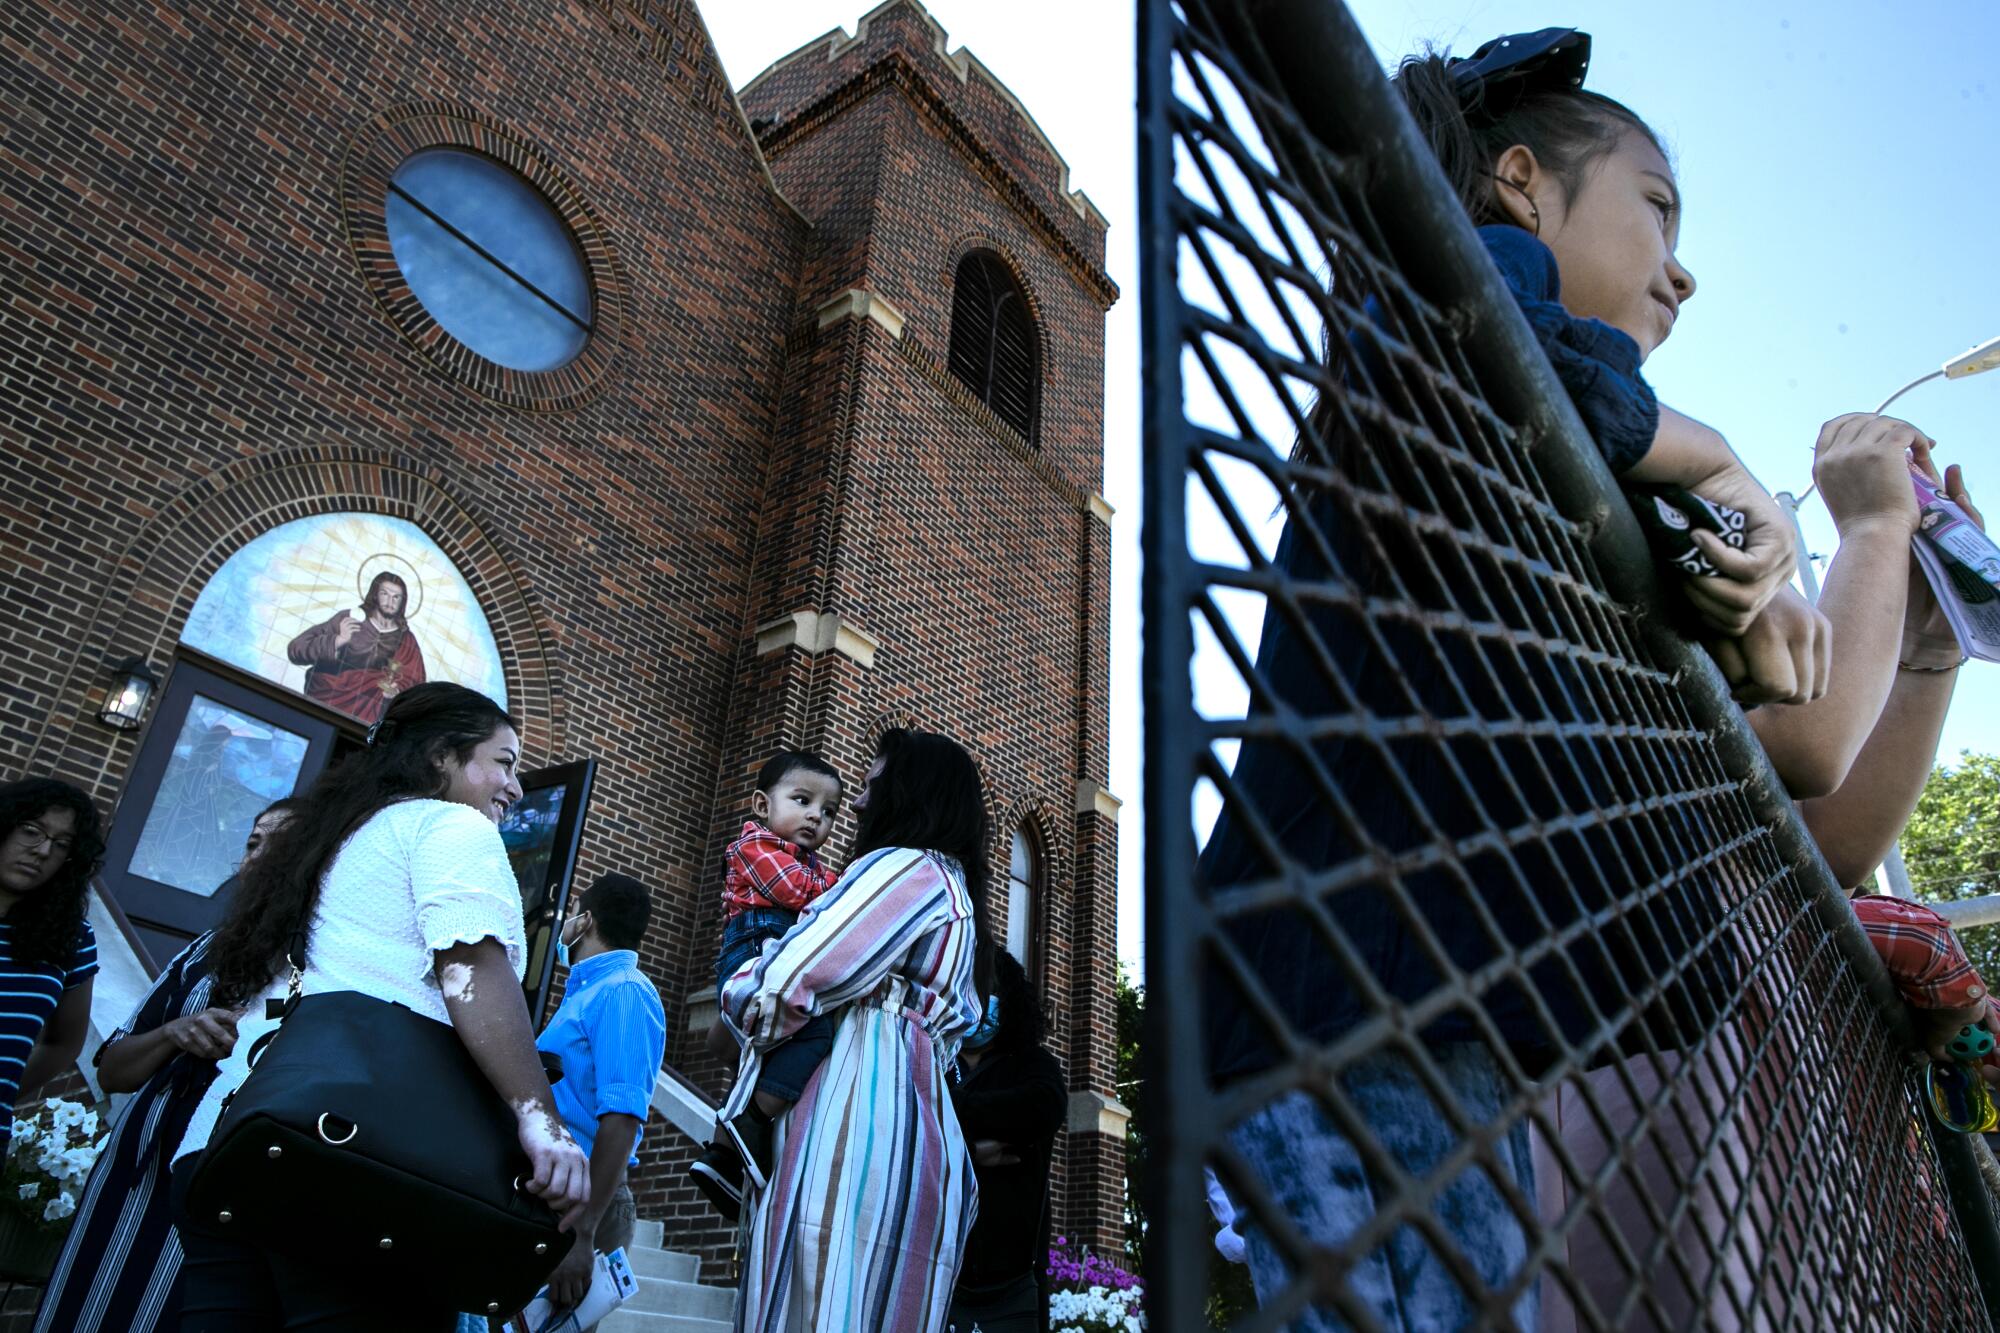 Parishioners gather after Mass at Our Lady of Guadalupe Catholic Church.